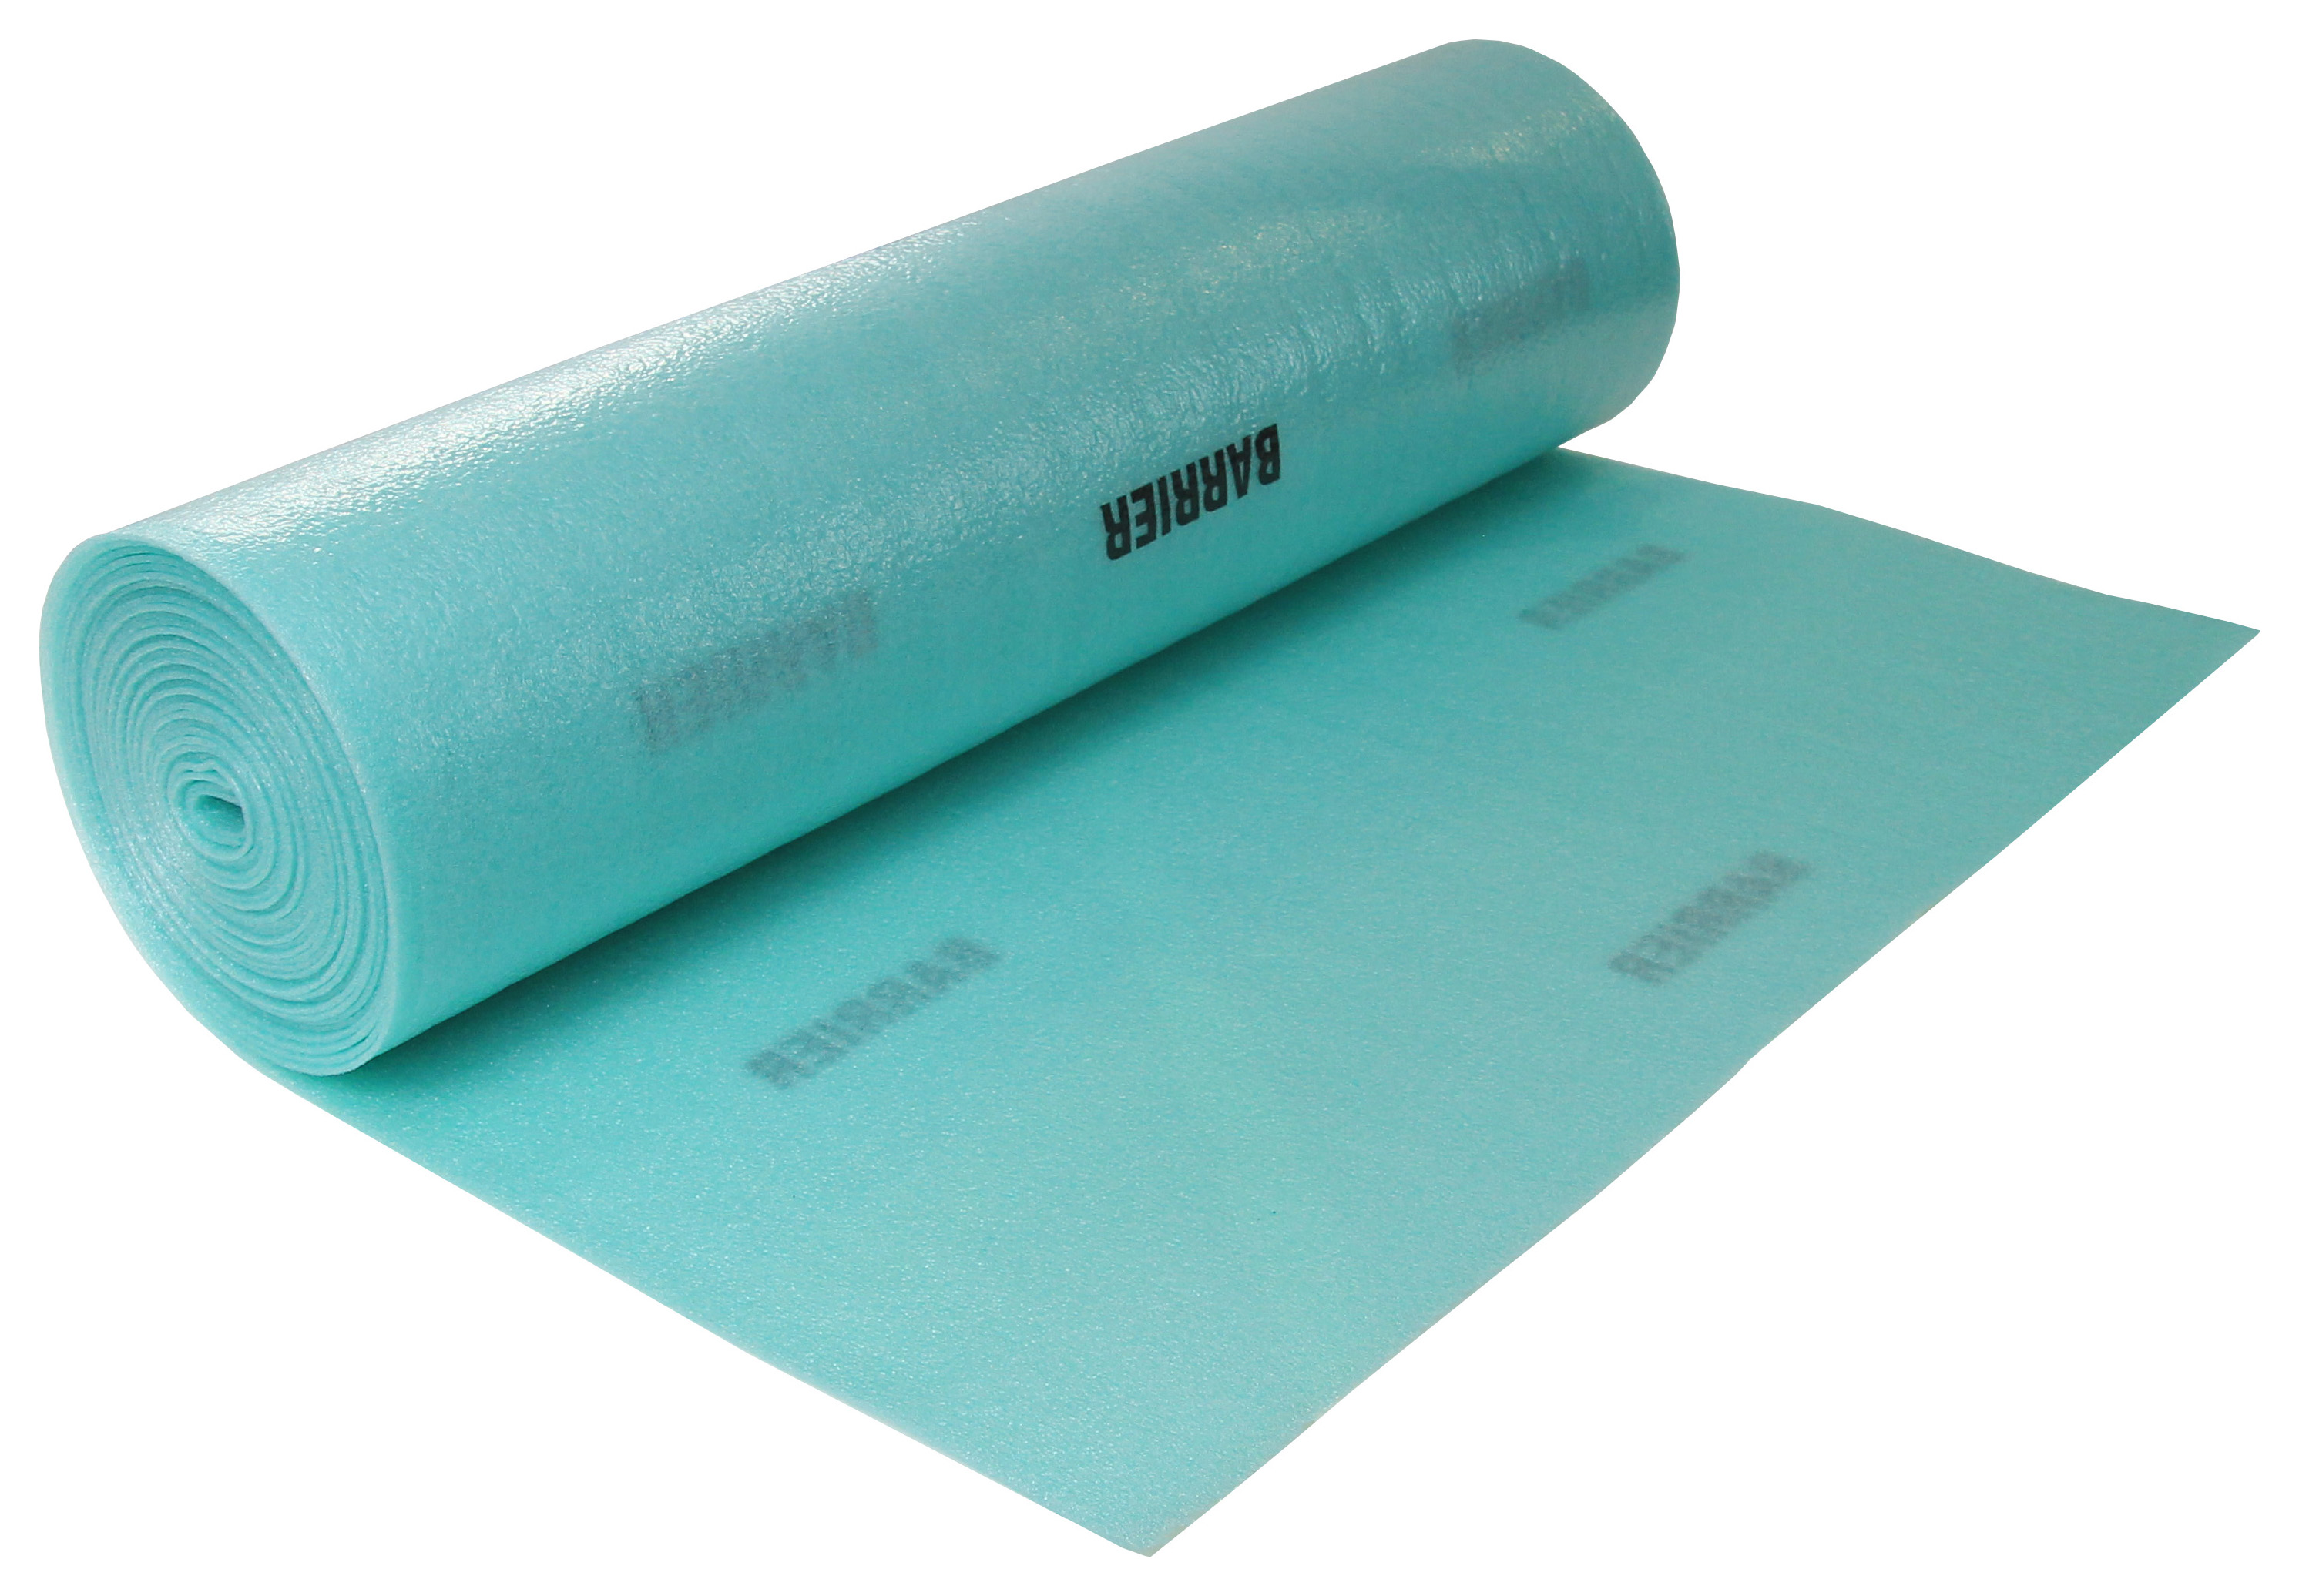 Barrier 3mm Laminate & Wood Flooring Underlay with Built-In Moisture Protection - 15m2